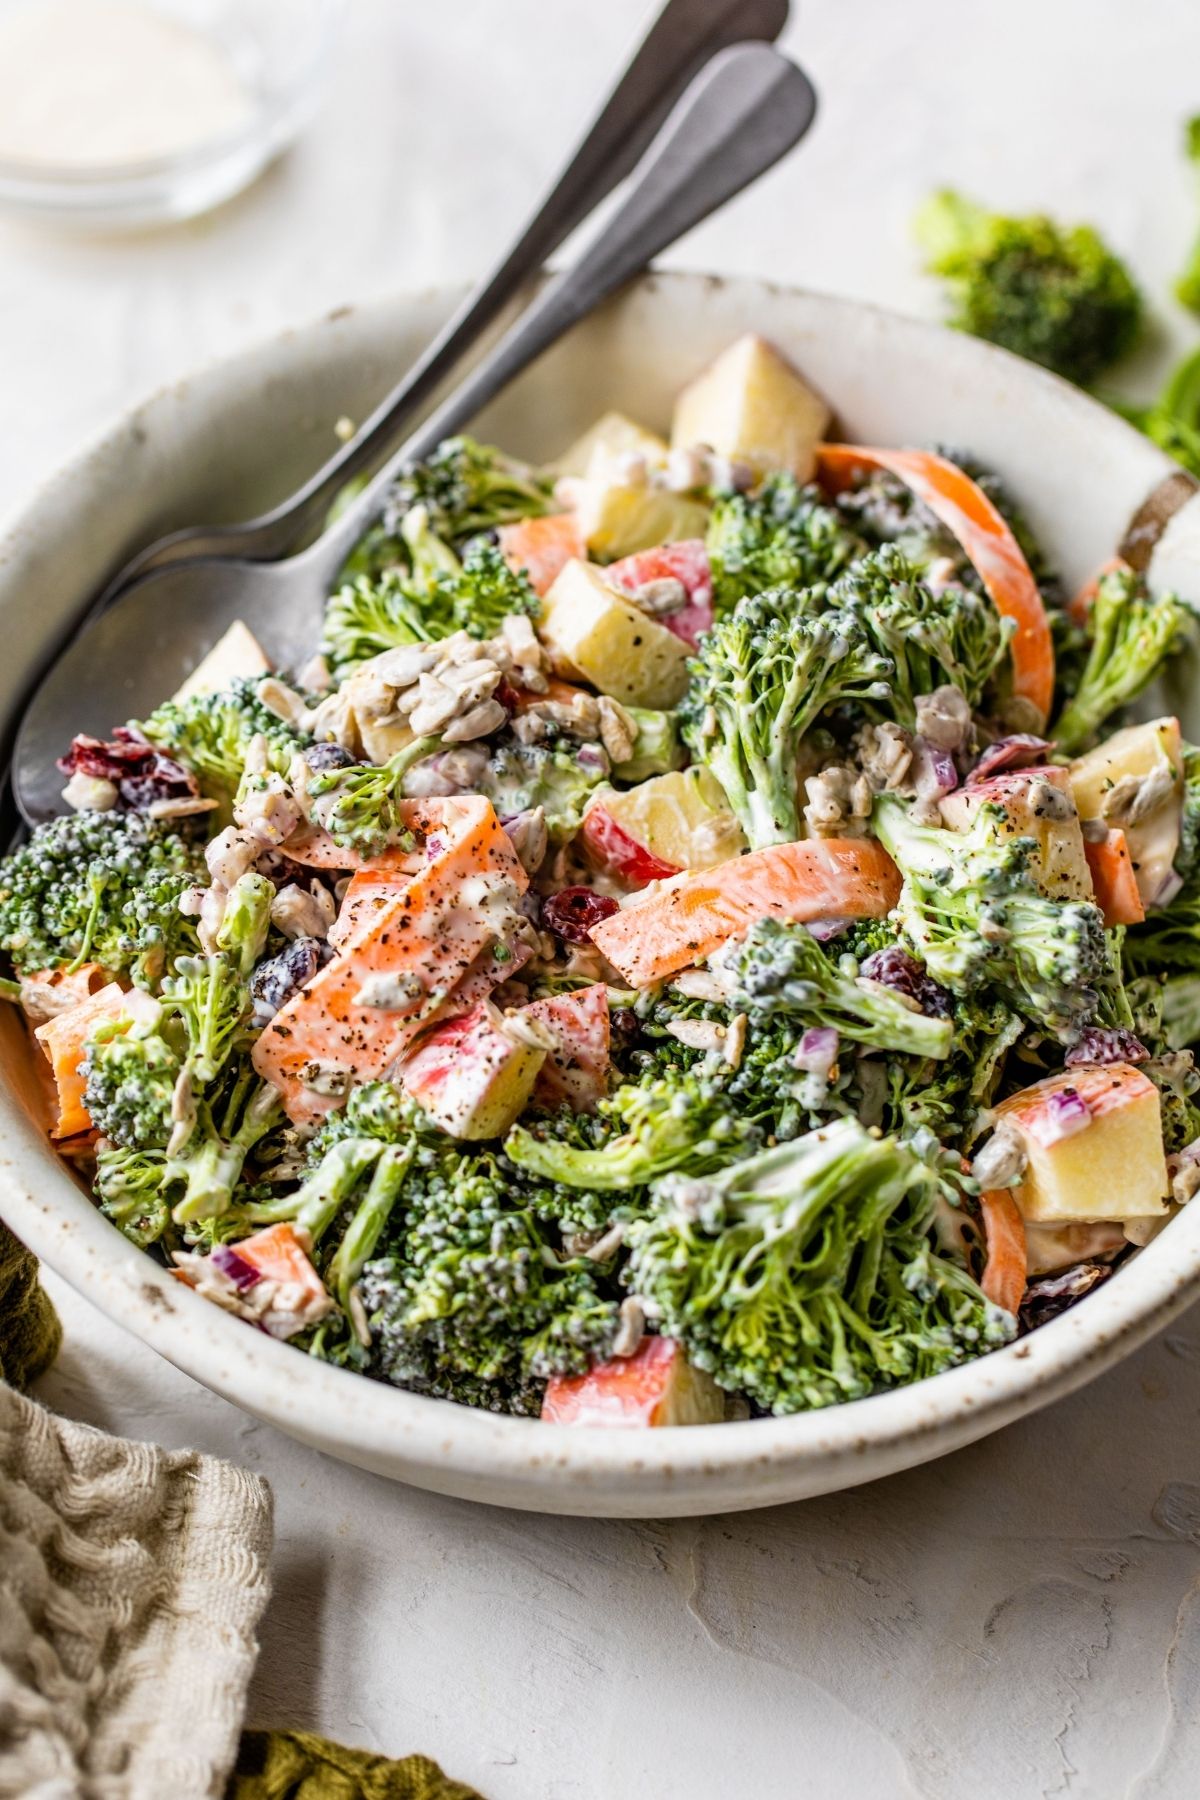 Broccoli apple salad made with shredded carrots in a white bowl.